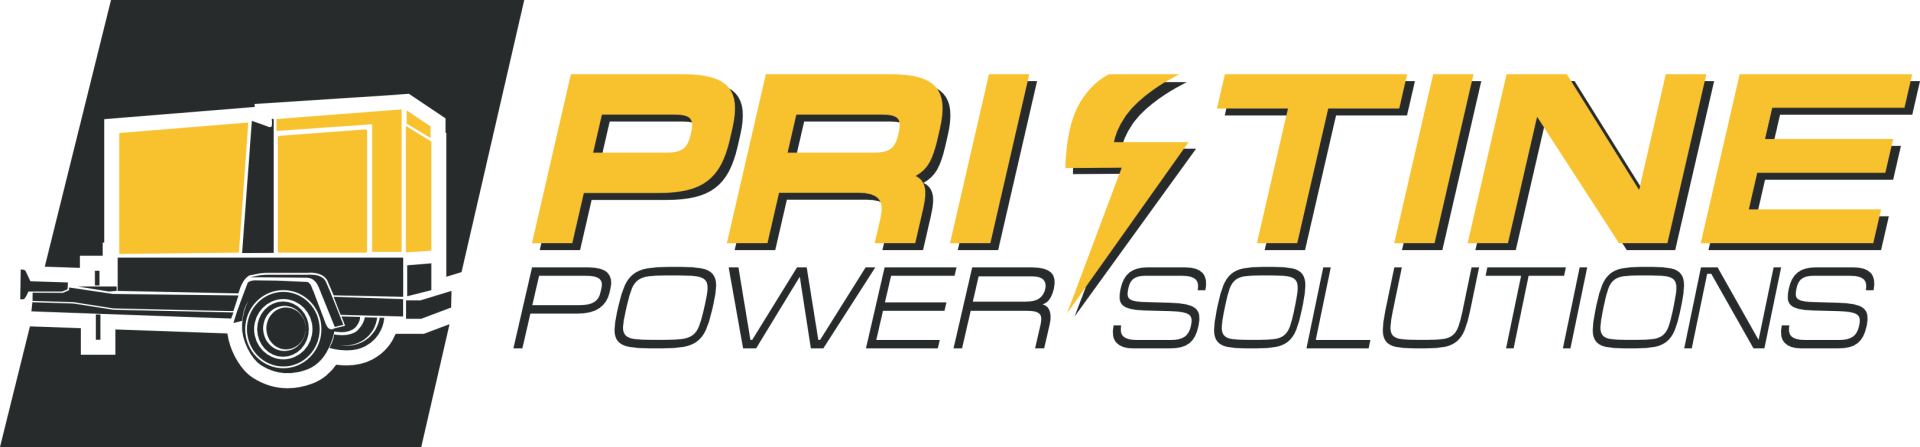 A yellow and black logo for pristine power solutions